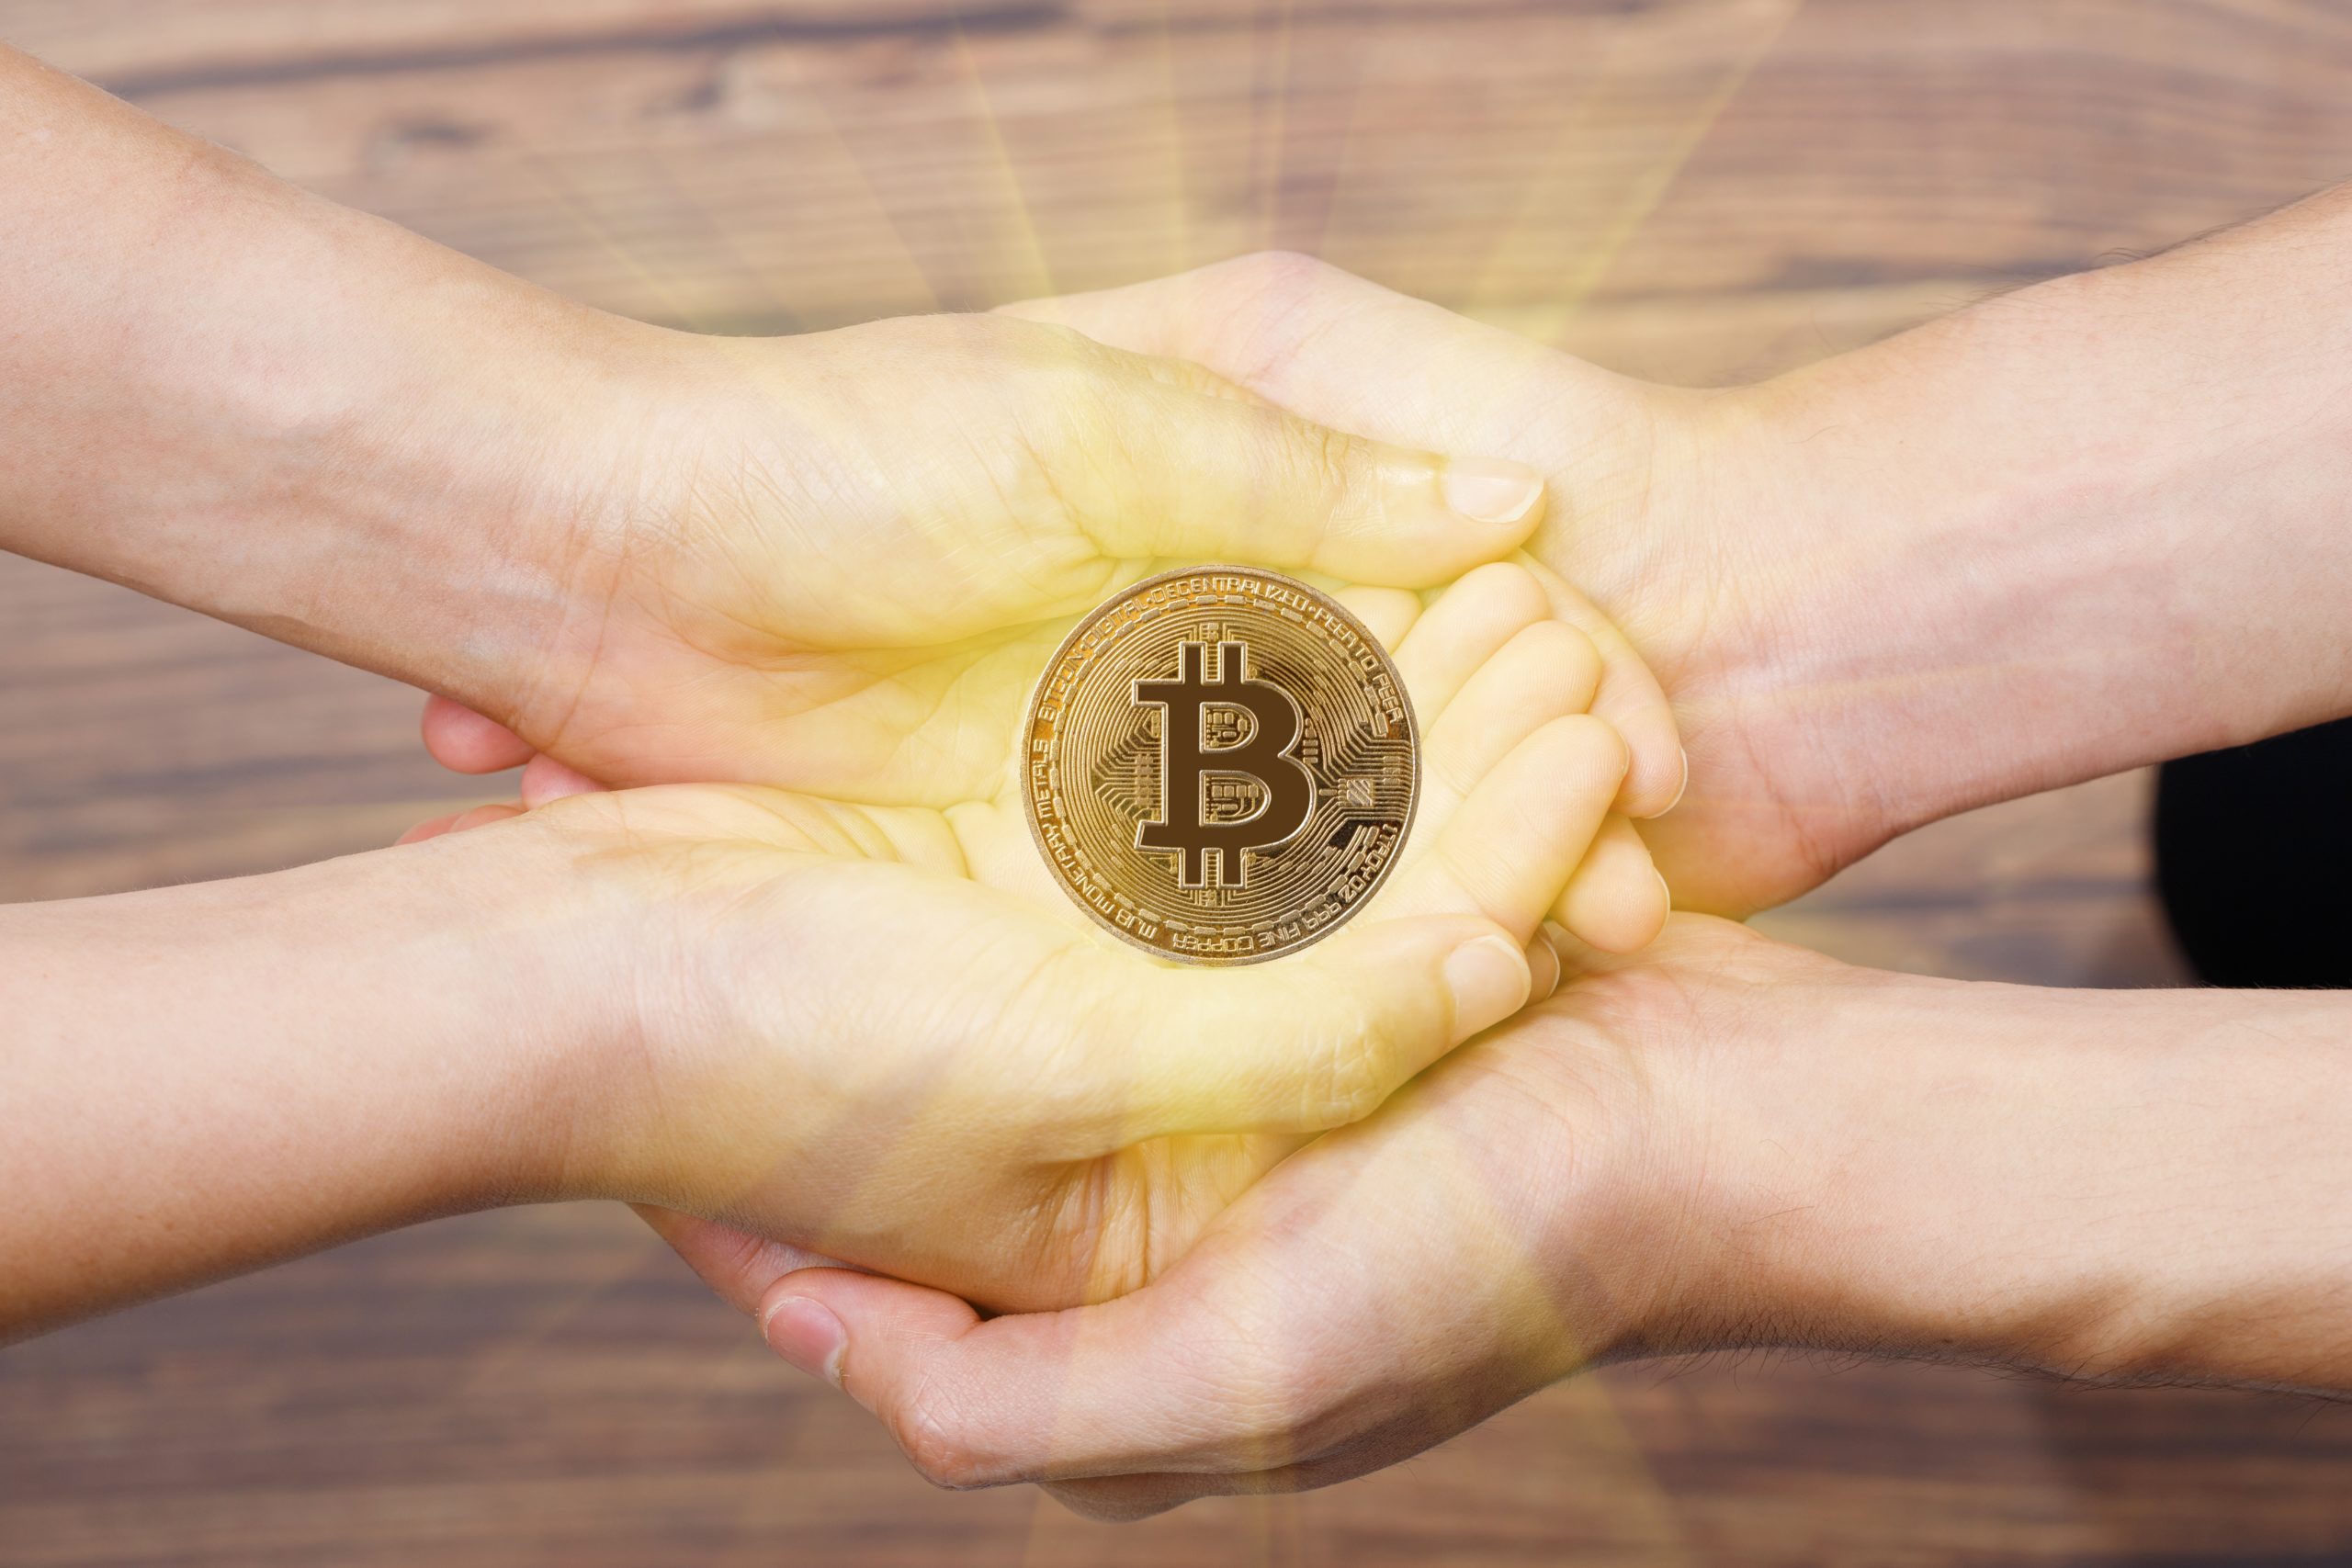 People,Hands,Together,Give,And,Receive,Love,Of,Btc,Bitcoin